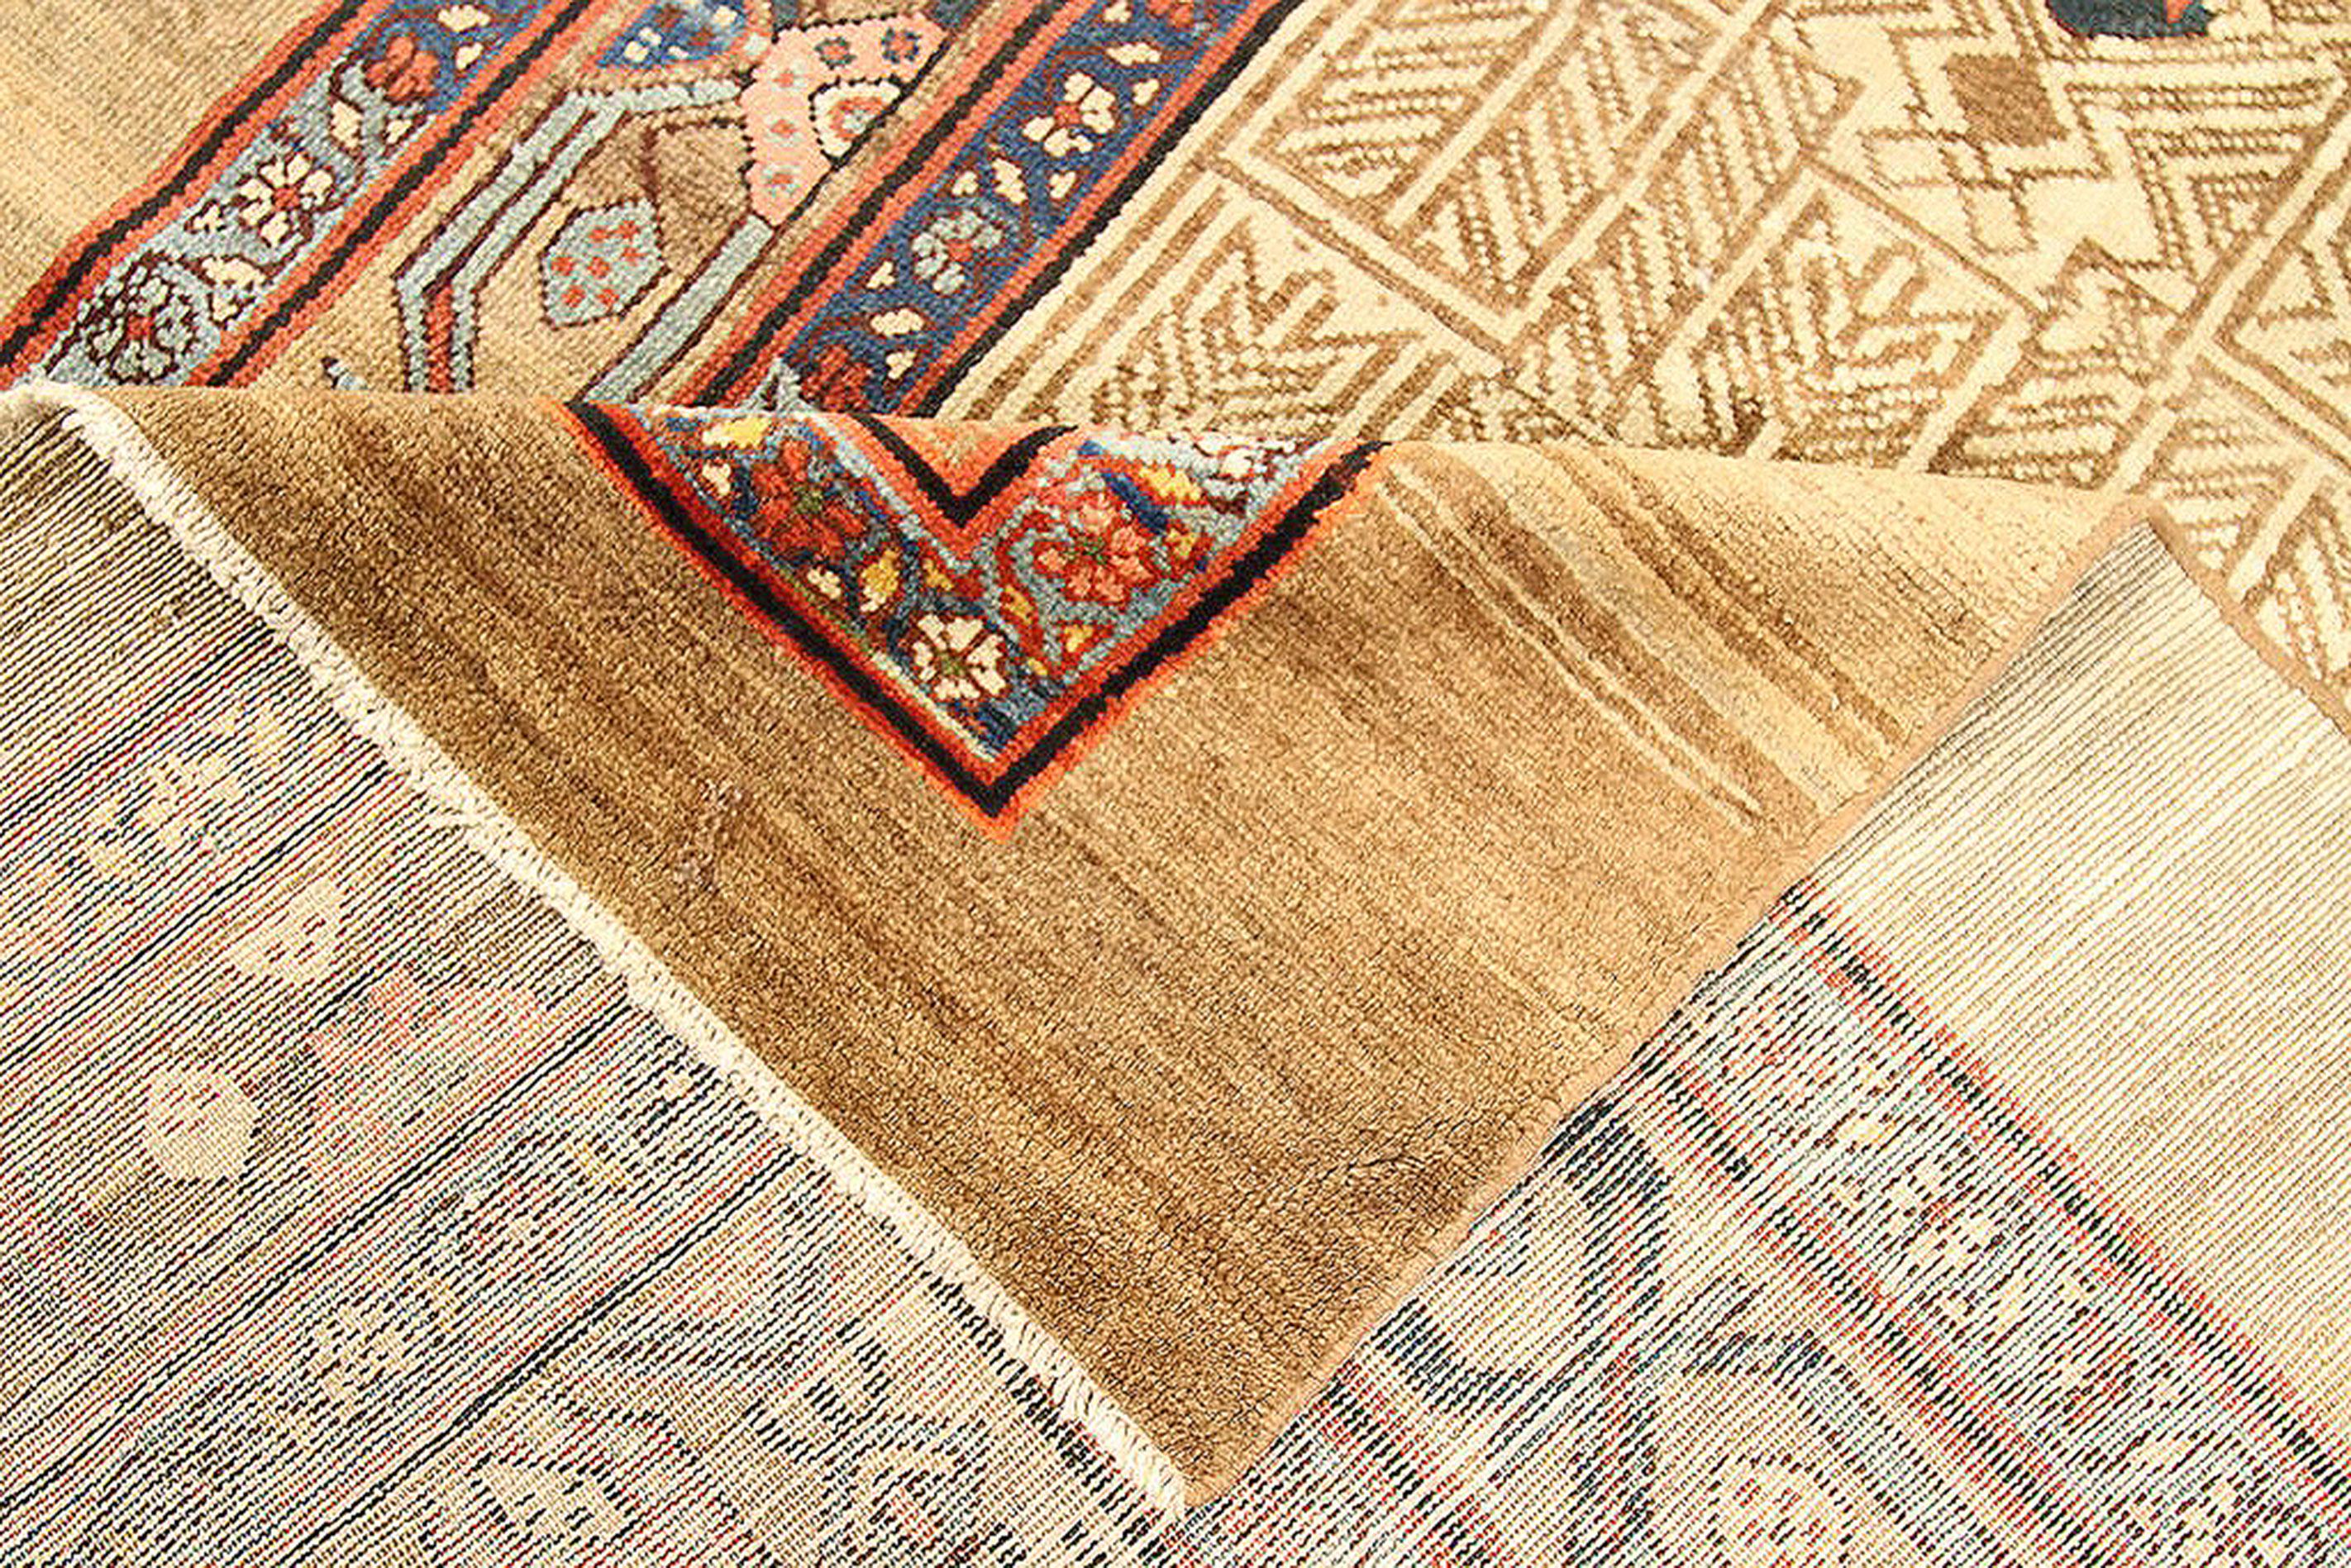 Antique Persian runner rug handwoven from the finest sheep’s wool and colored with all-natural vegetable dyes that are safe for humans and pets. It’s a traditional Sarab design featuring geometric details in beige and brown with blue and red floral